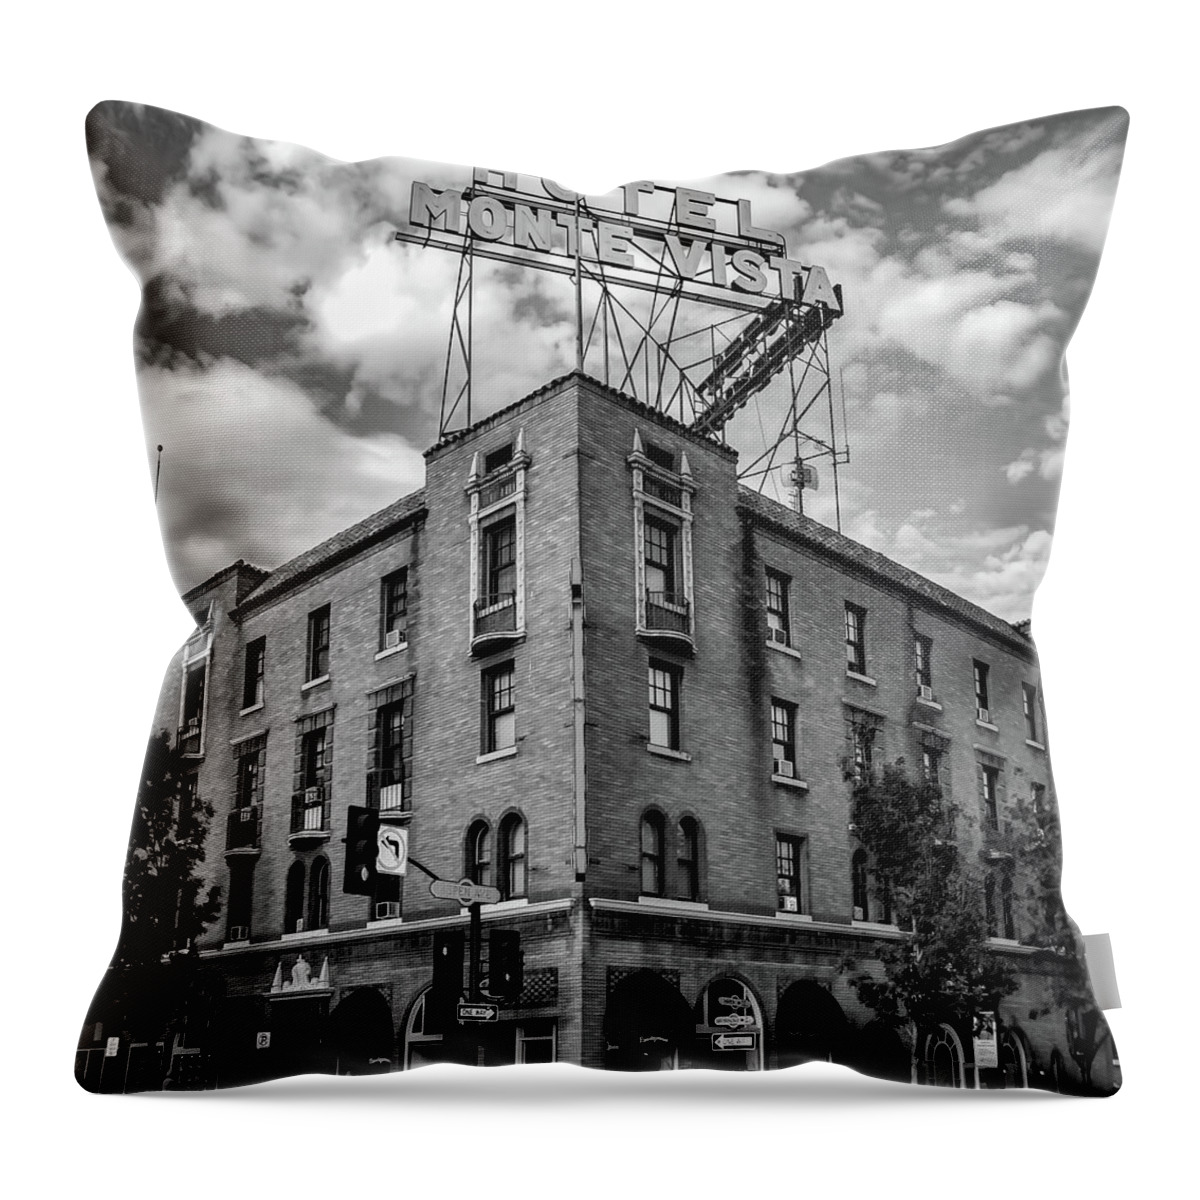 Flagstaff Hotel Throw Pillow featuring the photograph Black and White Historic Hotel Monte Vista Along Route 66 - Flagstaff Arizona by Gregory Ballos